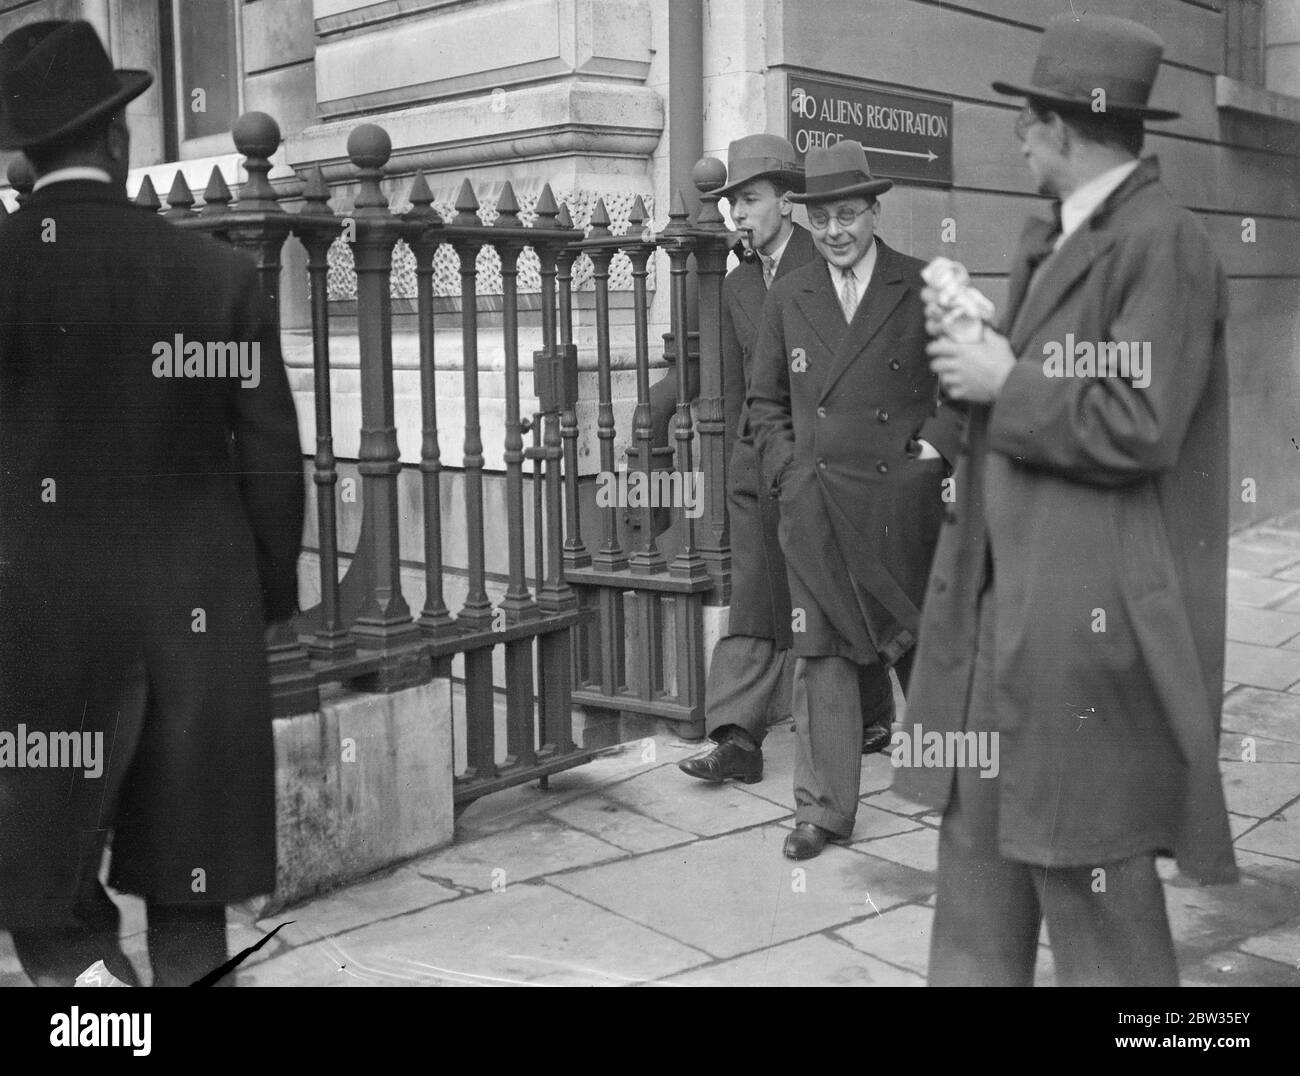 Fire conspiracy case resumed at Bow Street . The case in which eleven men and a women are accused of conspiracy to defraud in connection with fire insurance claims was resumed at Bow Street police court , London . Mr Louis Jarvis after today ' s hearing . 7 March 1933 Stock Photo